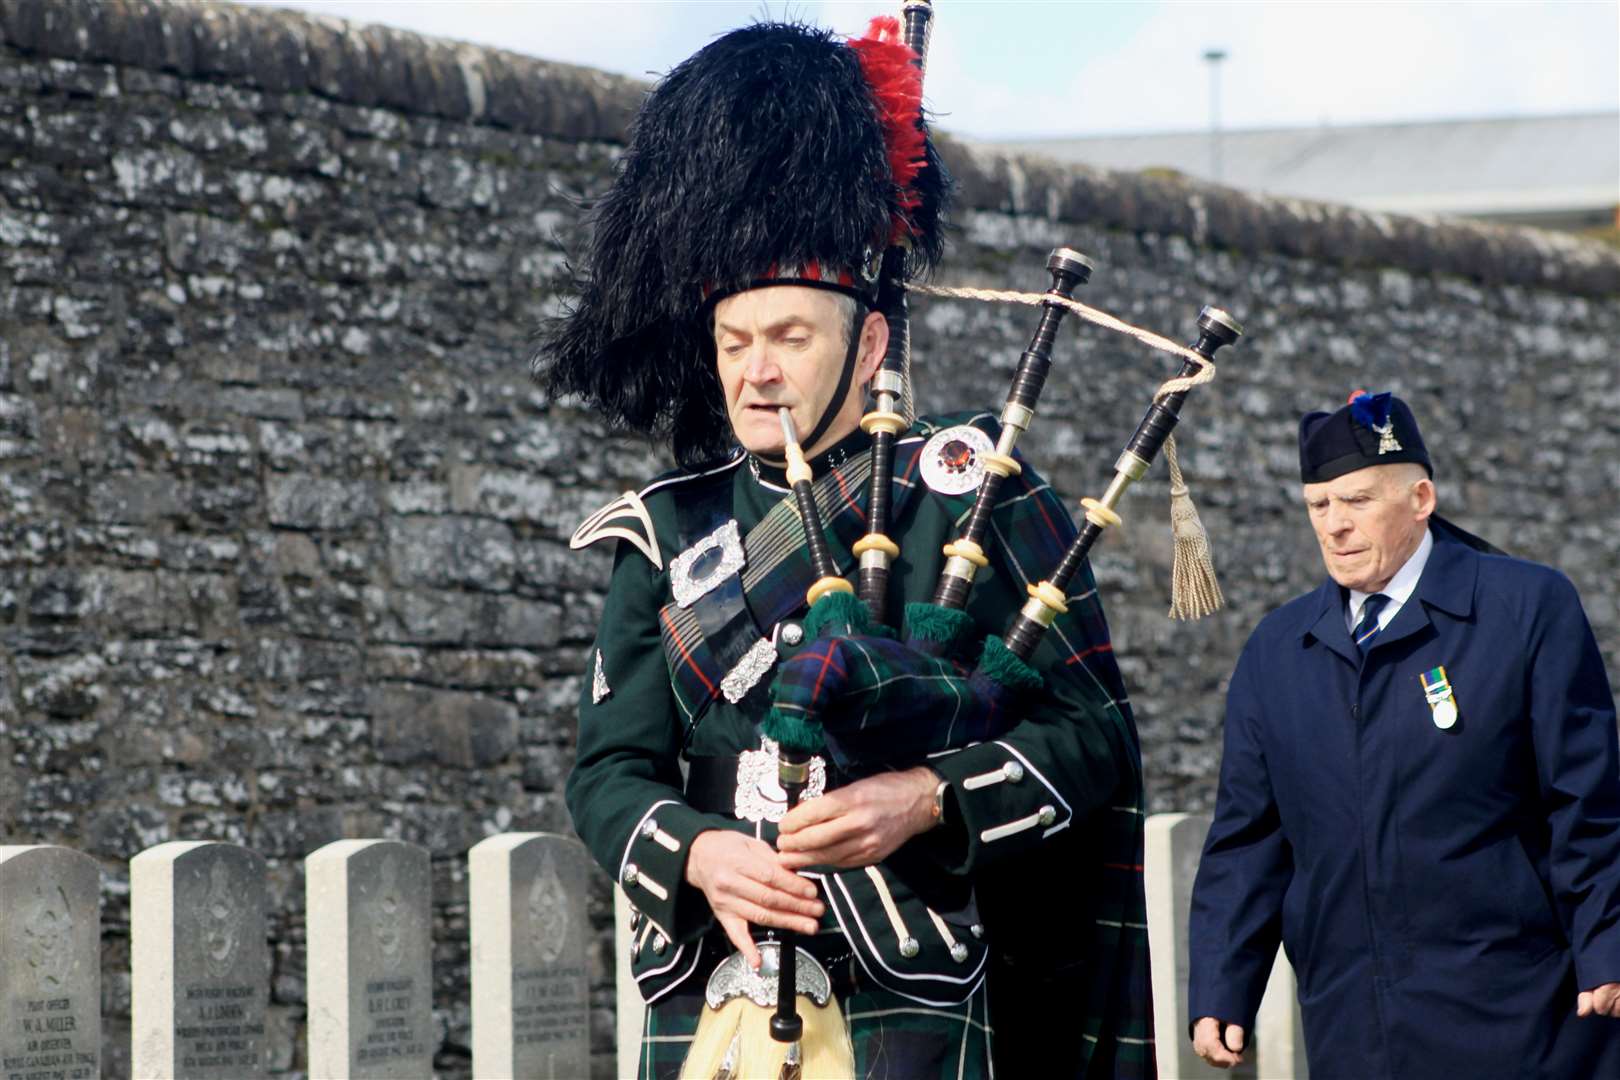 Pipe Corporal Gordon Tait, of Wick RBLS Pipe Band, followed by Alex Paterson, chairman of the Wick, Canisbay and Latheron branch of the Royal British Legion Scotland. Picture: Alan Hendry